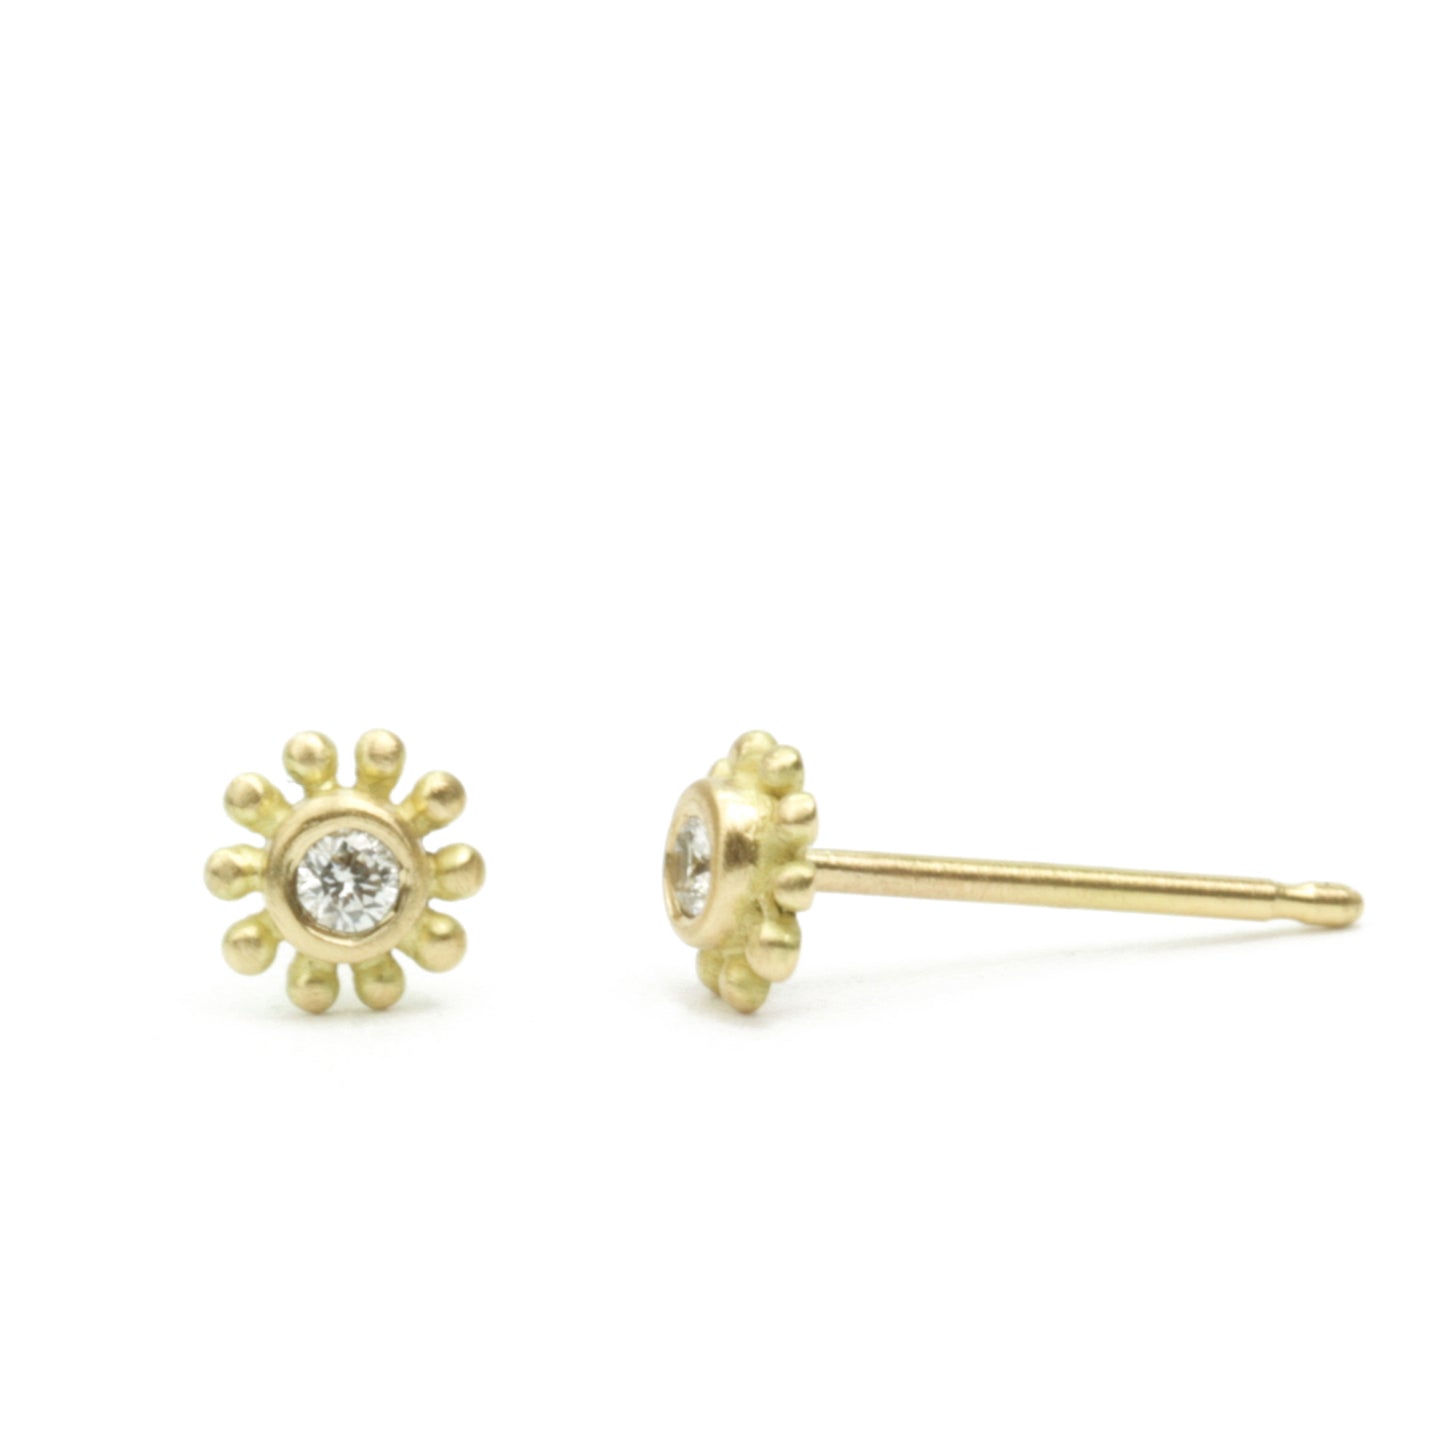 Palace Stud Earrings with diamonds, side and front views